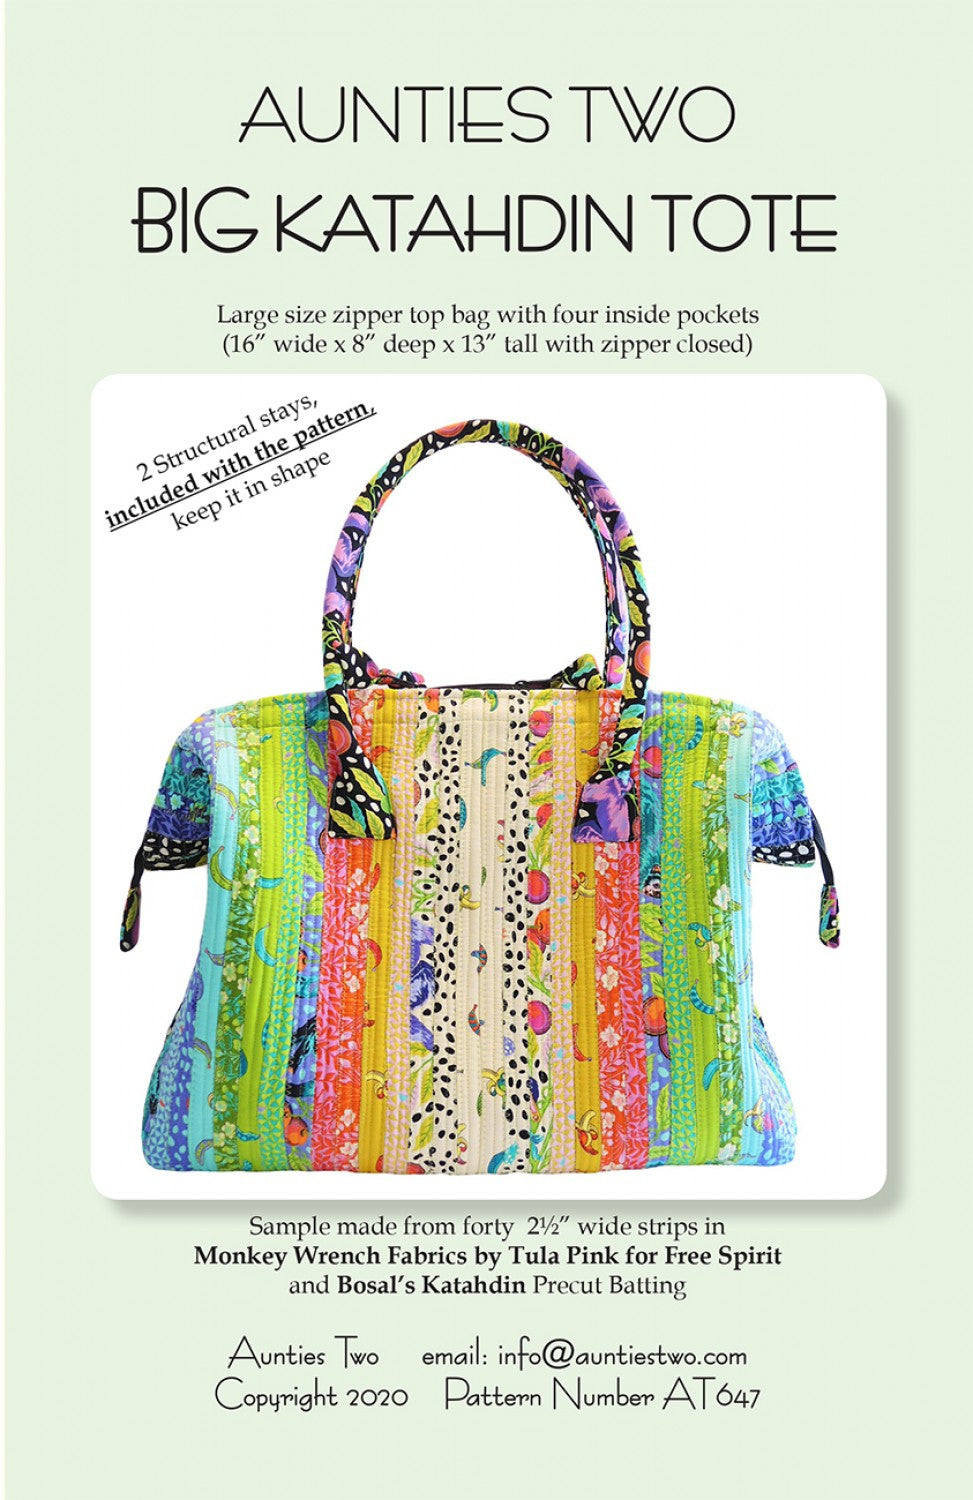 Big Katahdin Tote Sewing Pattern with Two Bag Stays by Carol McLeod of Aunties Two